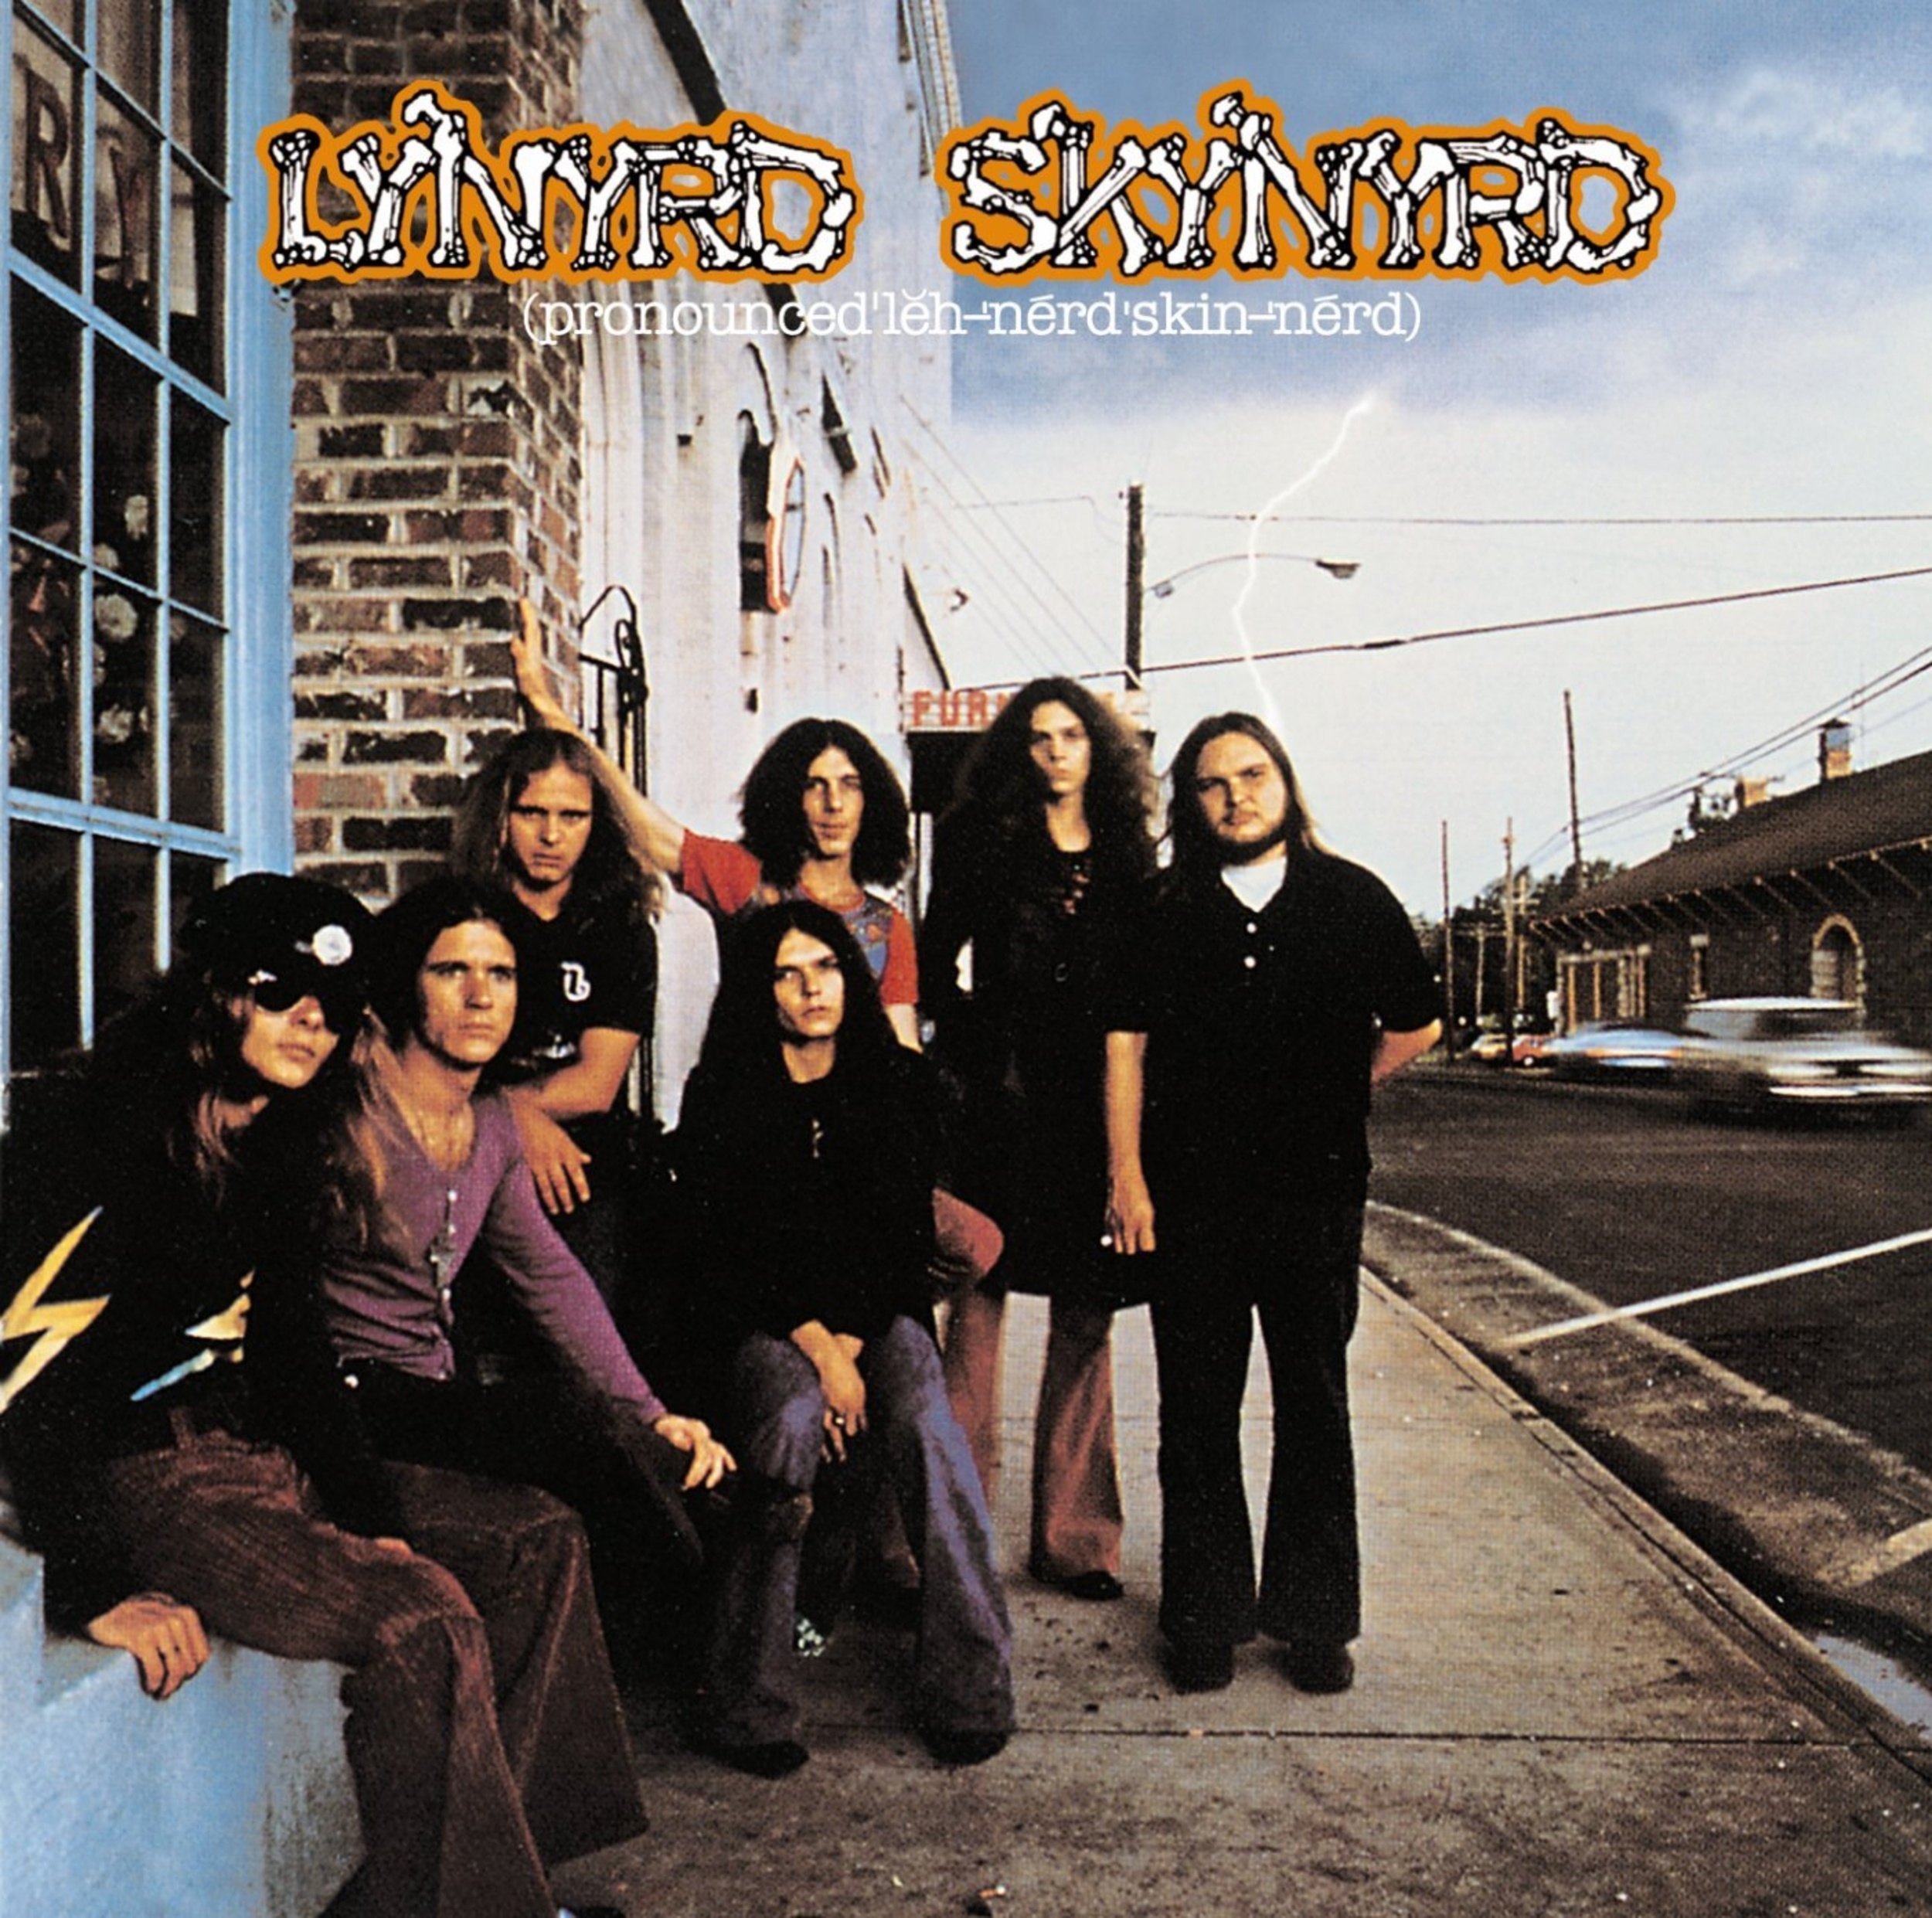 <p>No offense to "Sweet Home Alabama," but when it comes to Skynyrd's signature song, "Free Bird" is it. One can go to just about any rock concert, regardless the artist, and some drunk fan in the crowd will shout "<a href="https://www.youtube.com/watch?v=3mExcPmReUM">Free Bird</a>." The studio version from <em>Pronounced </em>cracked the top 20 of the Hot 100, and the <a href="https://www.youtube.com/watch?v=QxIWDmmqZzY">live </a>version from 1976 also charted well. Simply put, the nine-plus-minute tune is iconic. Known for its massive guitar solos and Ronnie Van Zant's sweet-sounding voice of freedom, if there's a song that truly defines "classic rock," this might be it.</p><p><a href='https://www.msn.com/en-us/community/channel/vid-cj9pqbr0vn9in2b6ddcd8sfgpfq6x6utp44fssrv6mc2gtybw0us'>Follow us on MSN to see more of our exclusive entertainment content.</a></p>